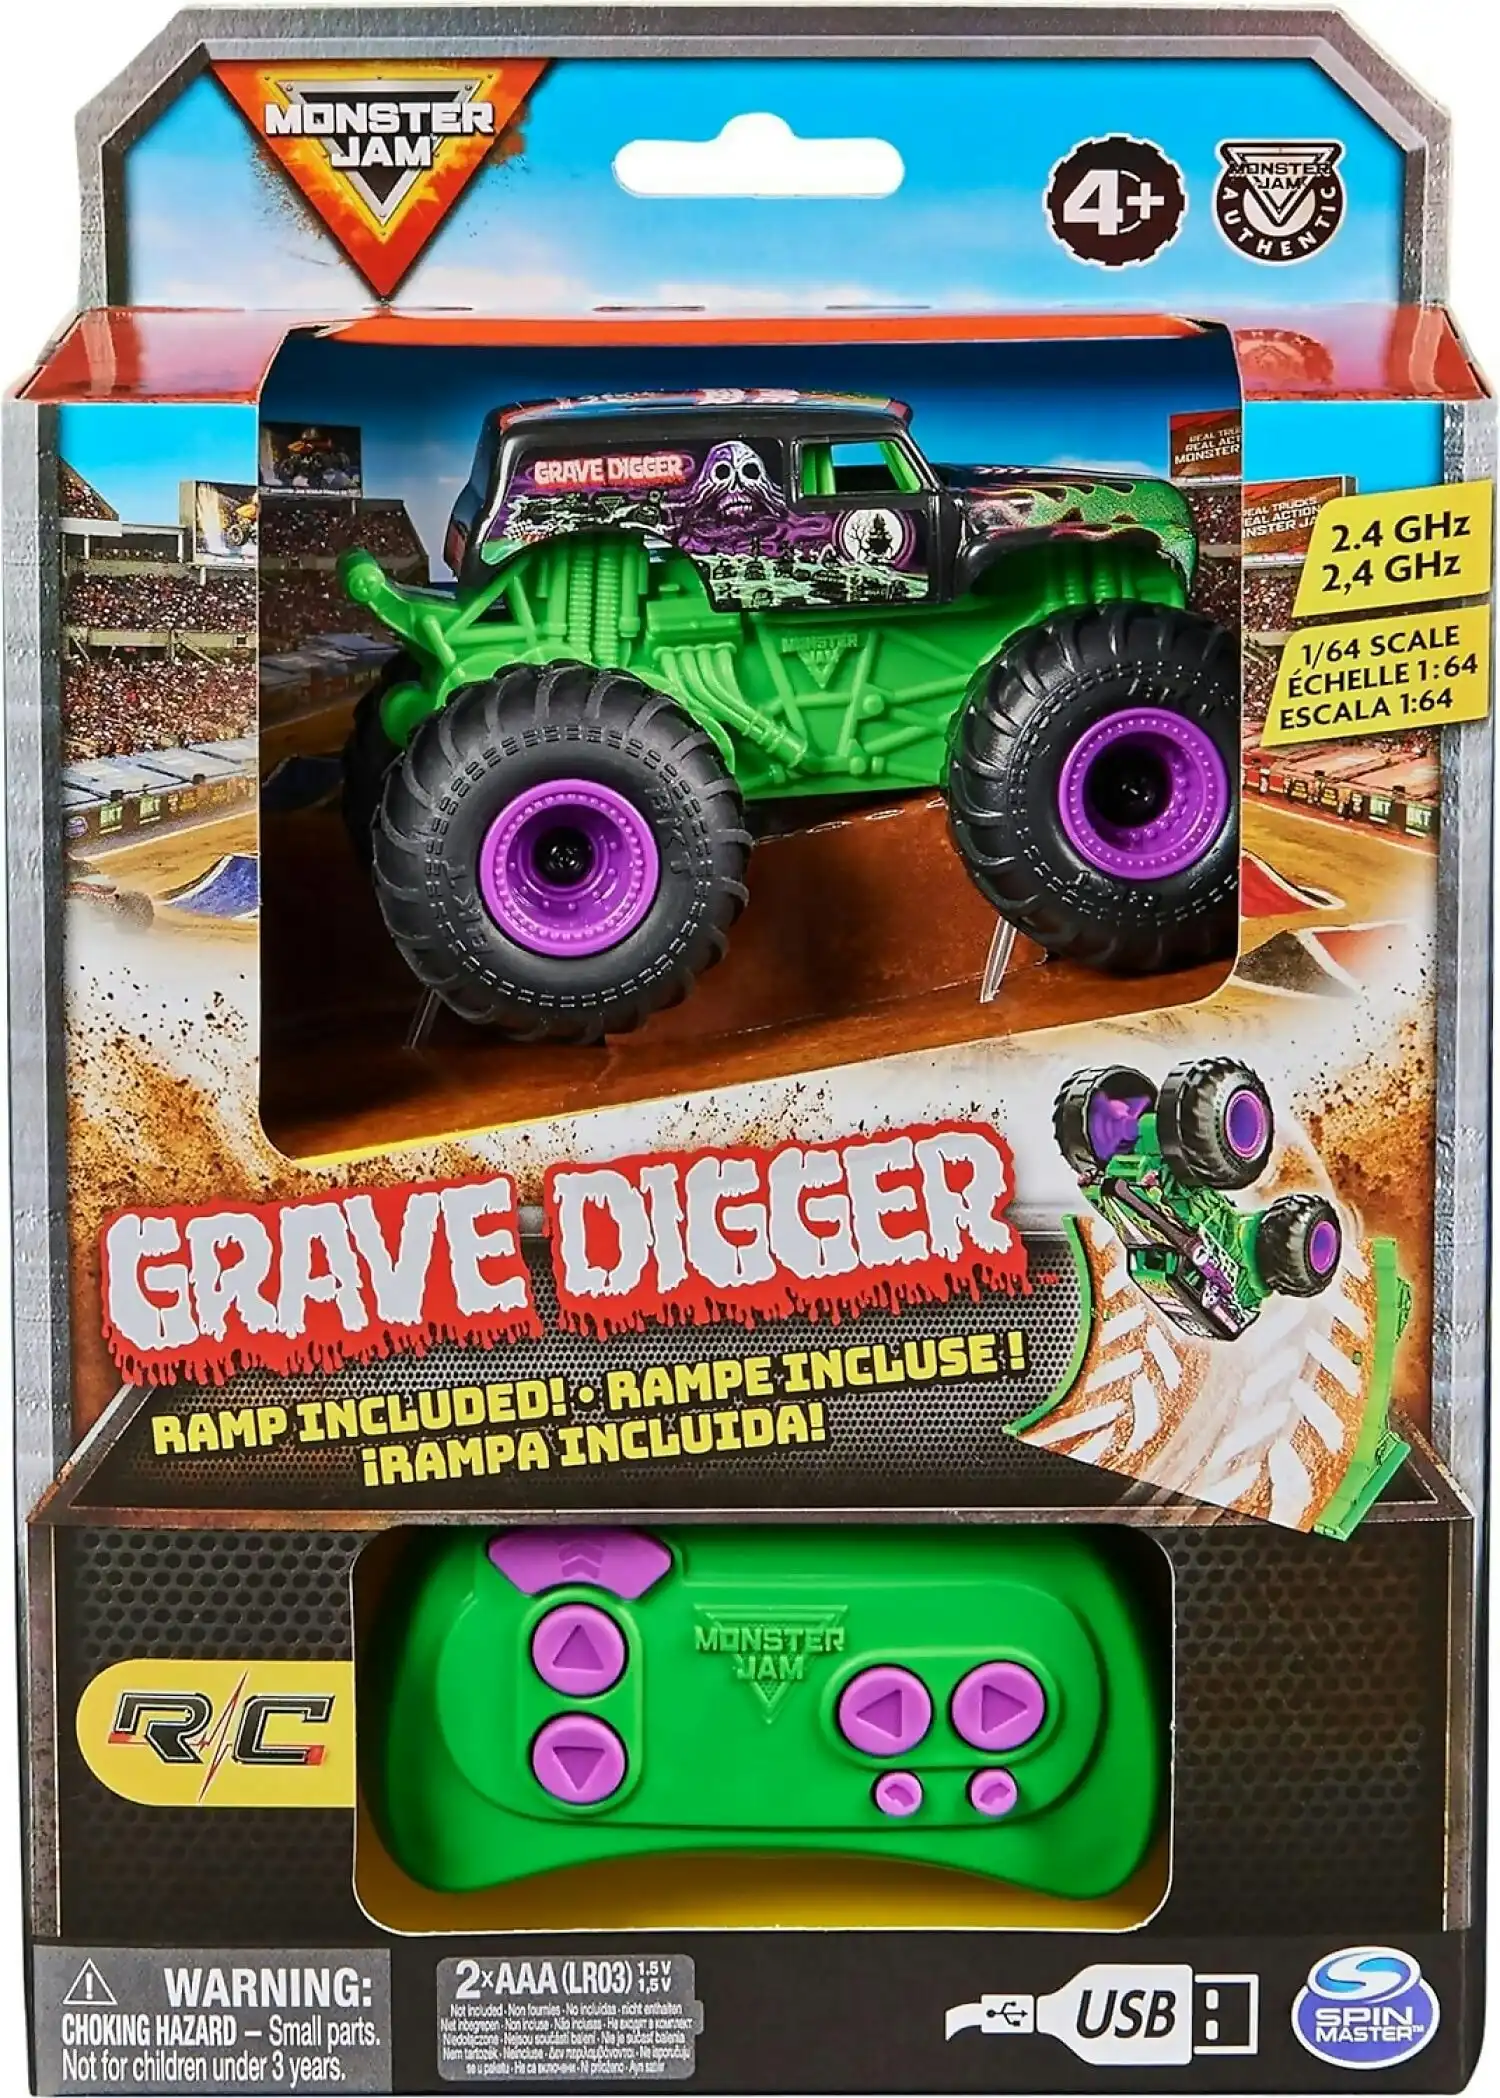 Monster Jam - Grave Digger Remote Control Monster Truck 1:64 Scale Includes Ramp Rc Cars Kids Toys For Boys And Girls Ages 4 And Up - Spin Master